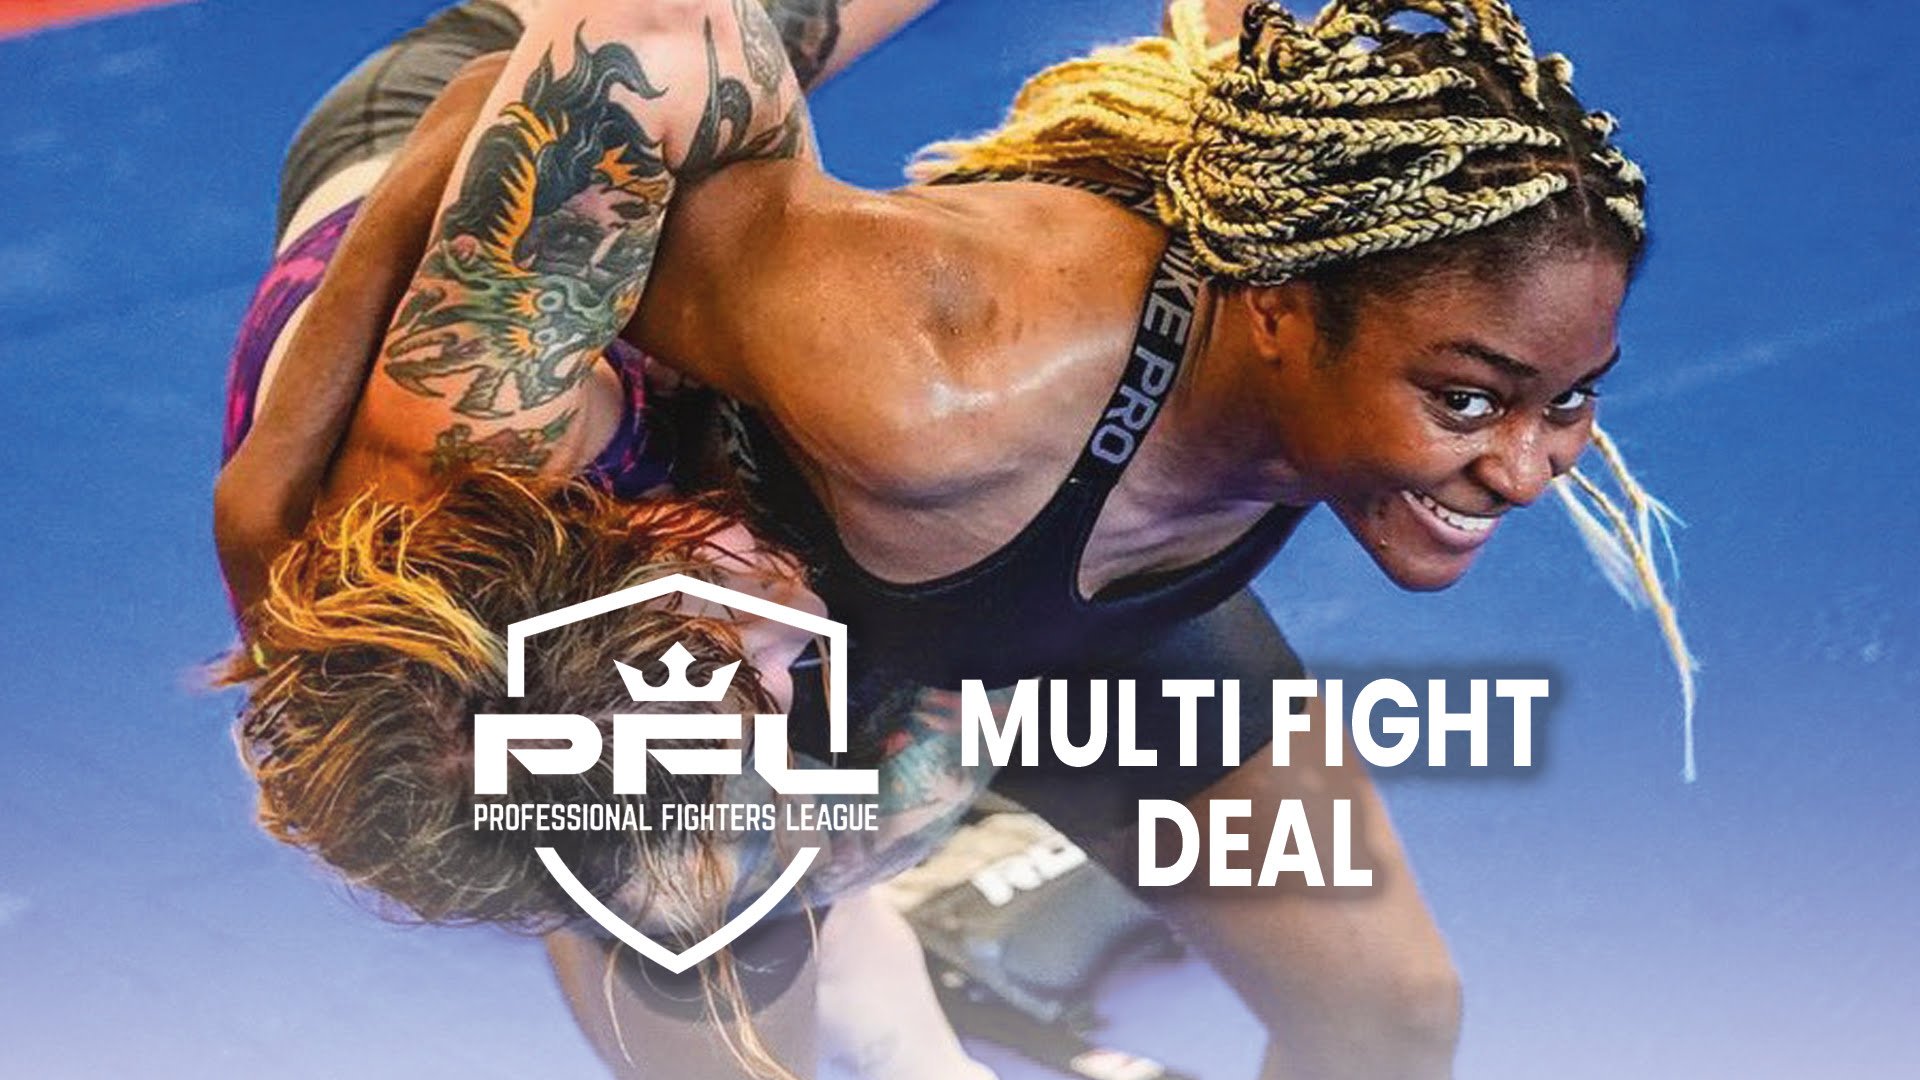 Rising MMA Prospect Shanelle Dyer Signs Multi-Fight Deal with PFL